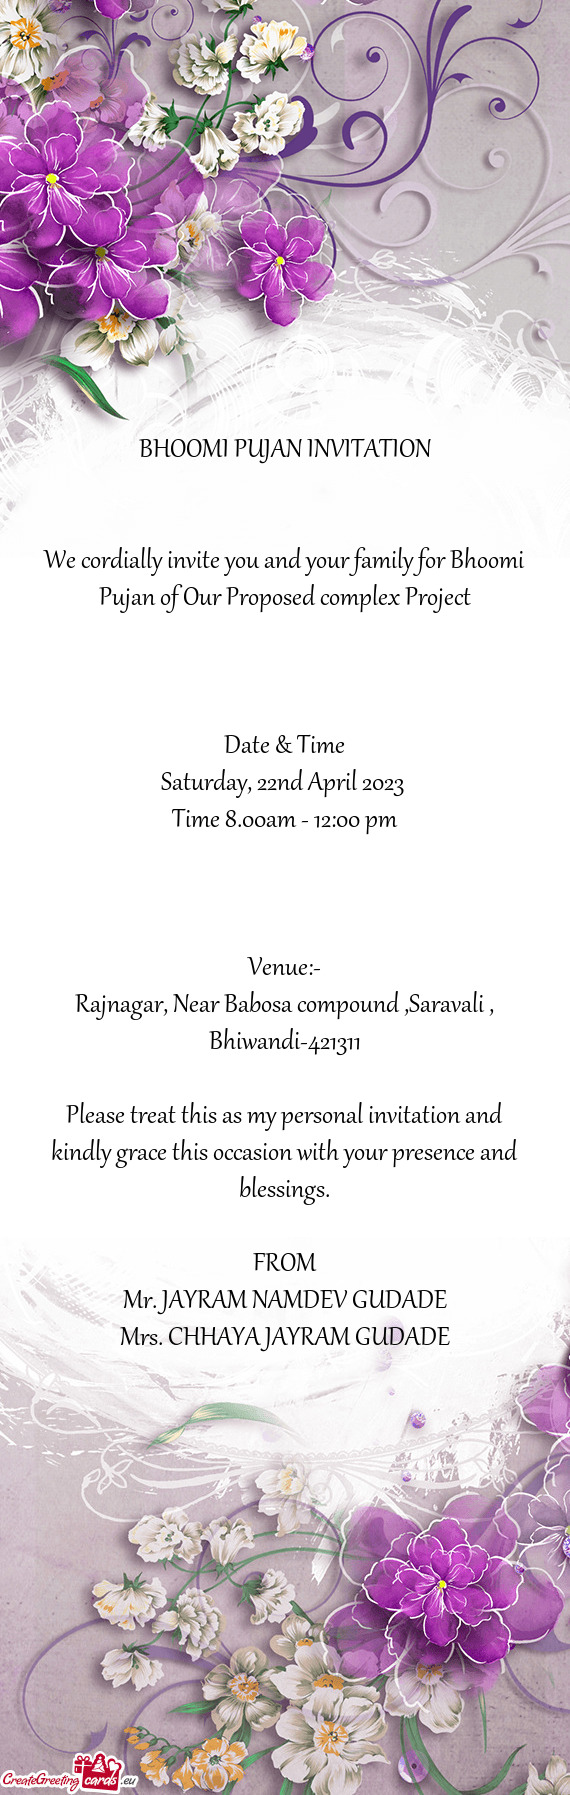 We cordially invite you and your family for Bhoomi Pujan of Our Proposed complex Project